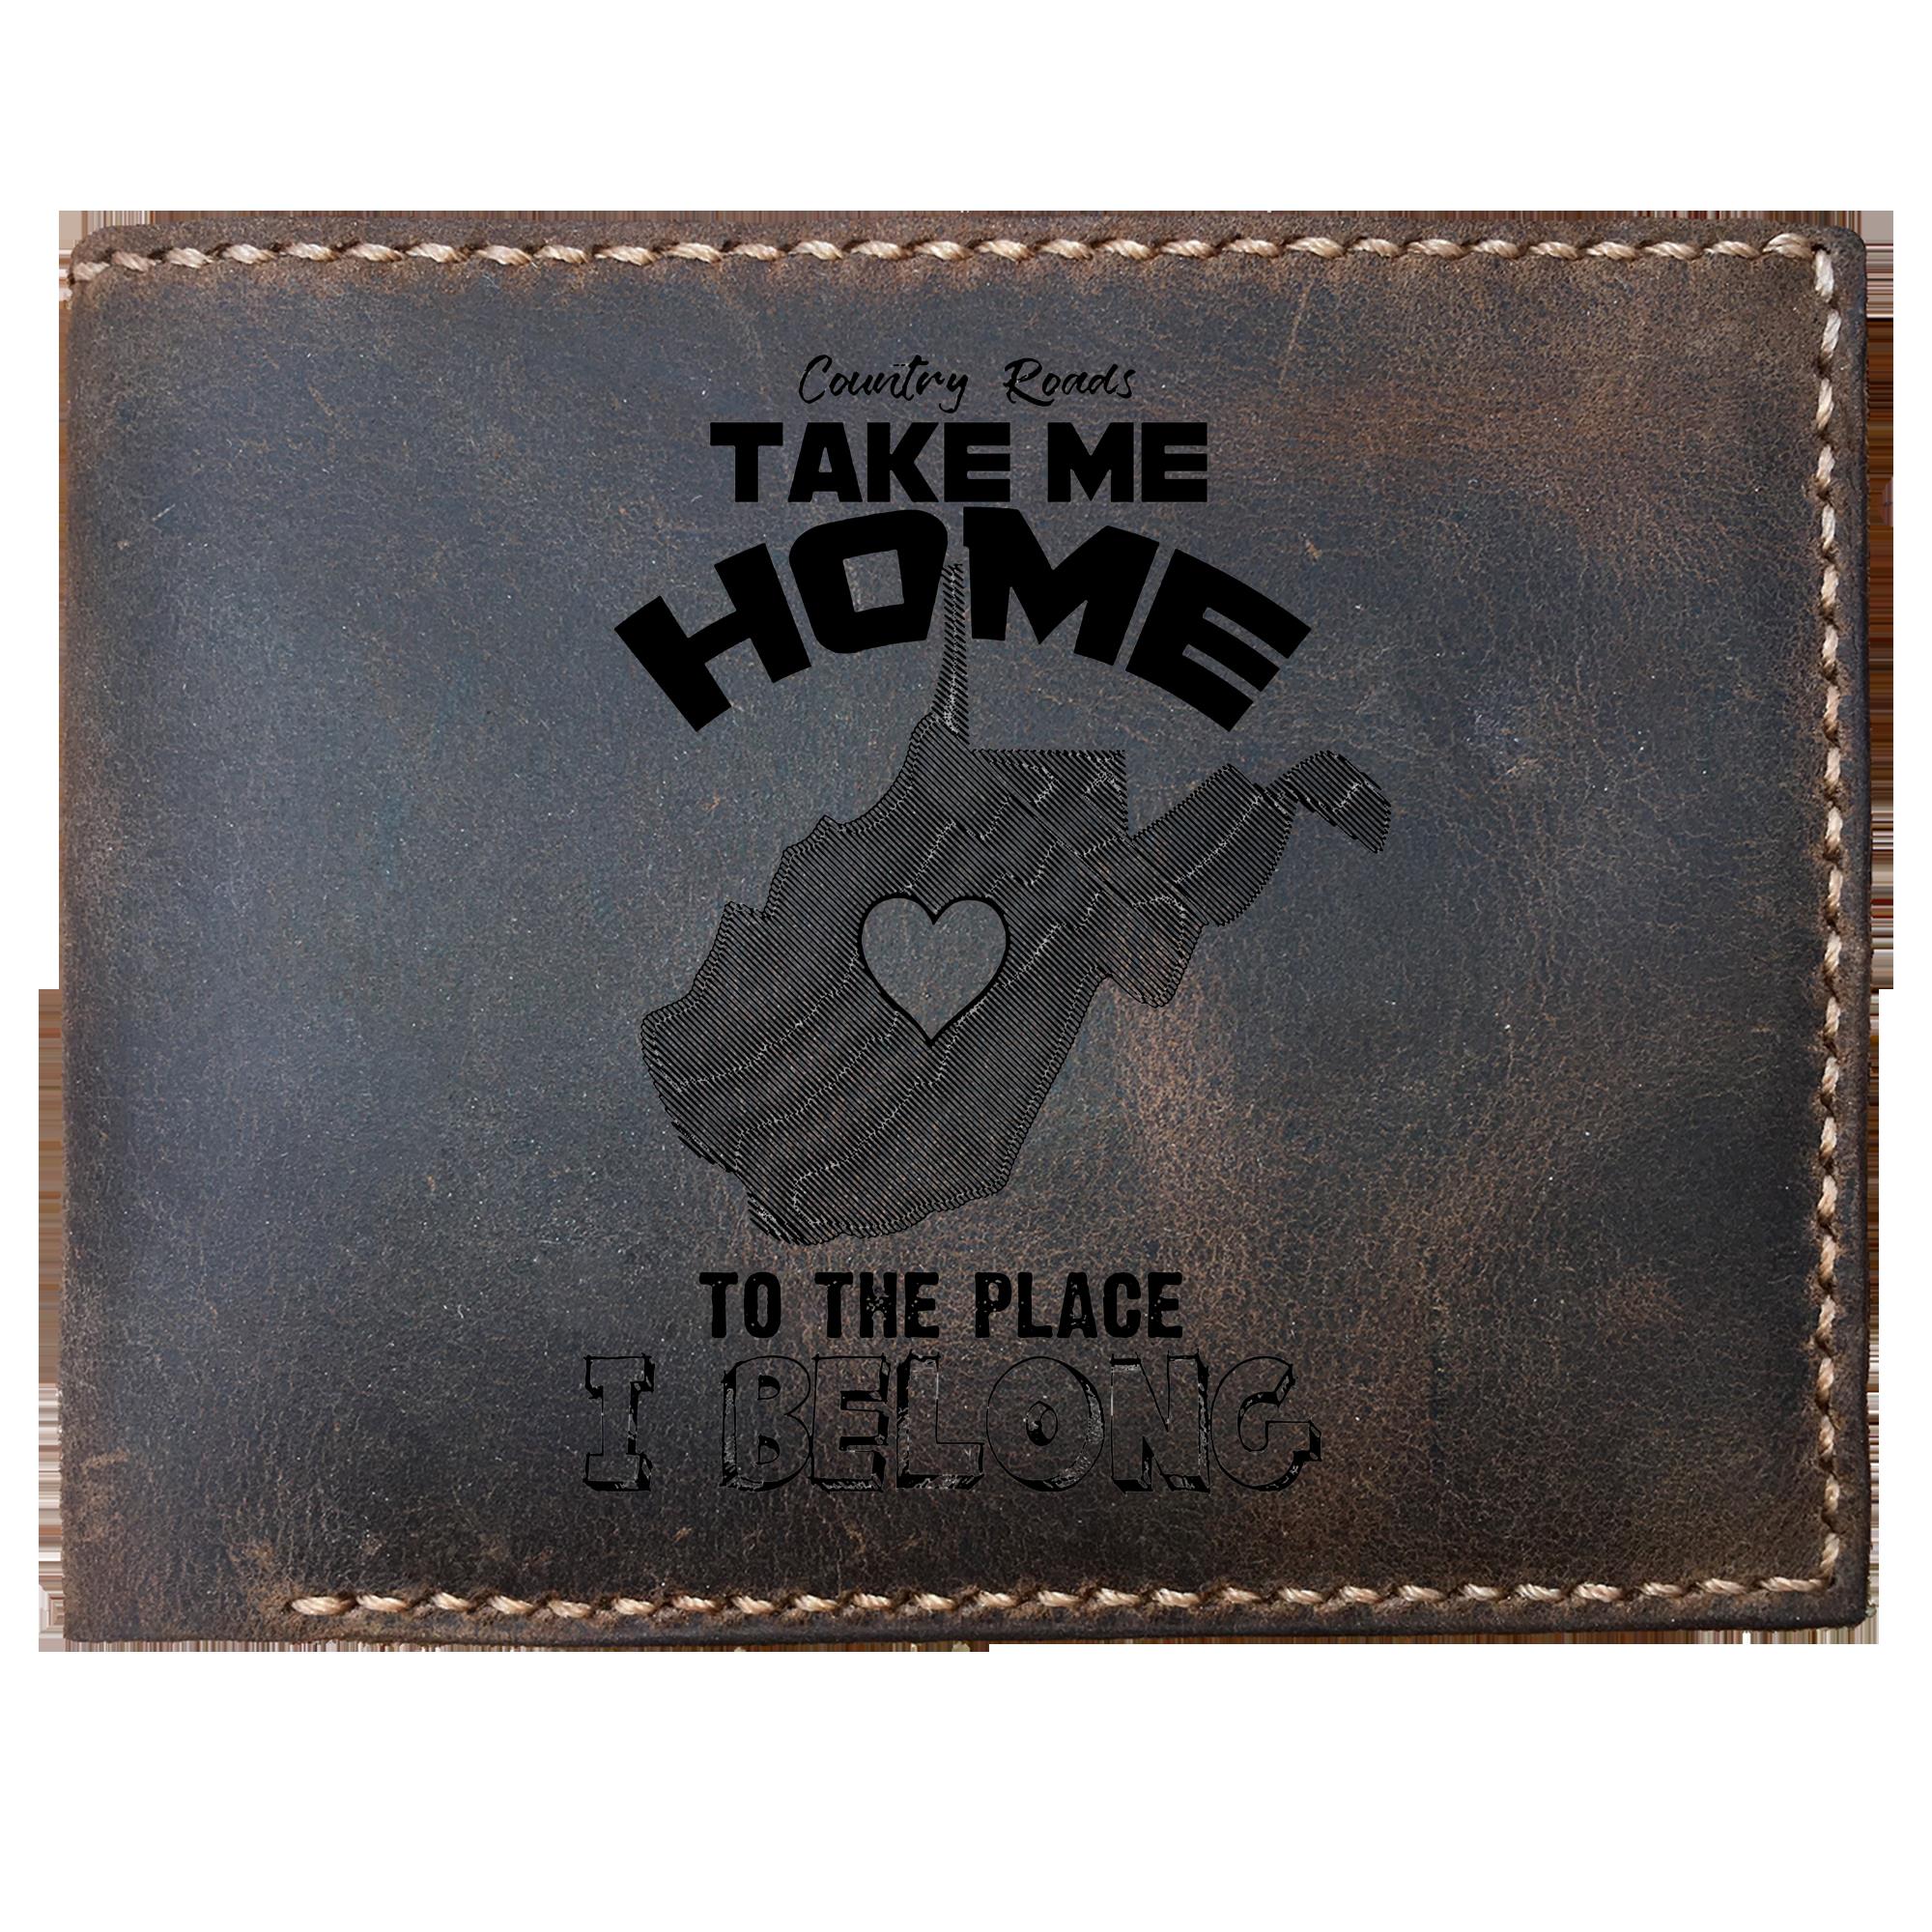 Skitongifts Funny Custom Engraved Bifold Leather Wallet For Men, Country Roads Take Me Home To The Place I Belong, State Wv For West Virginia Pride